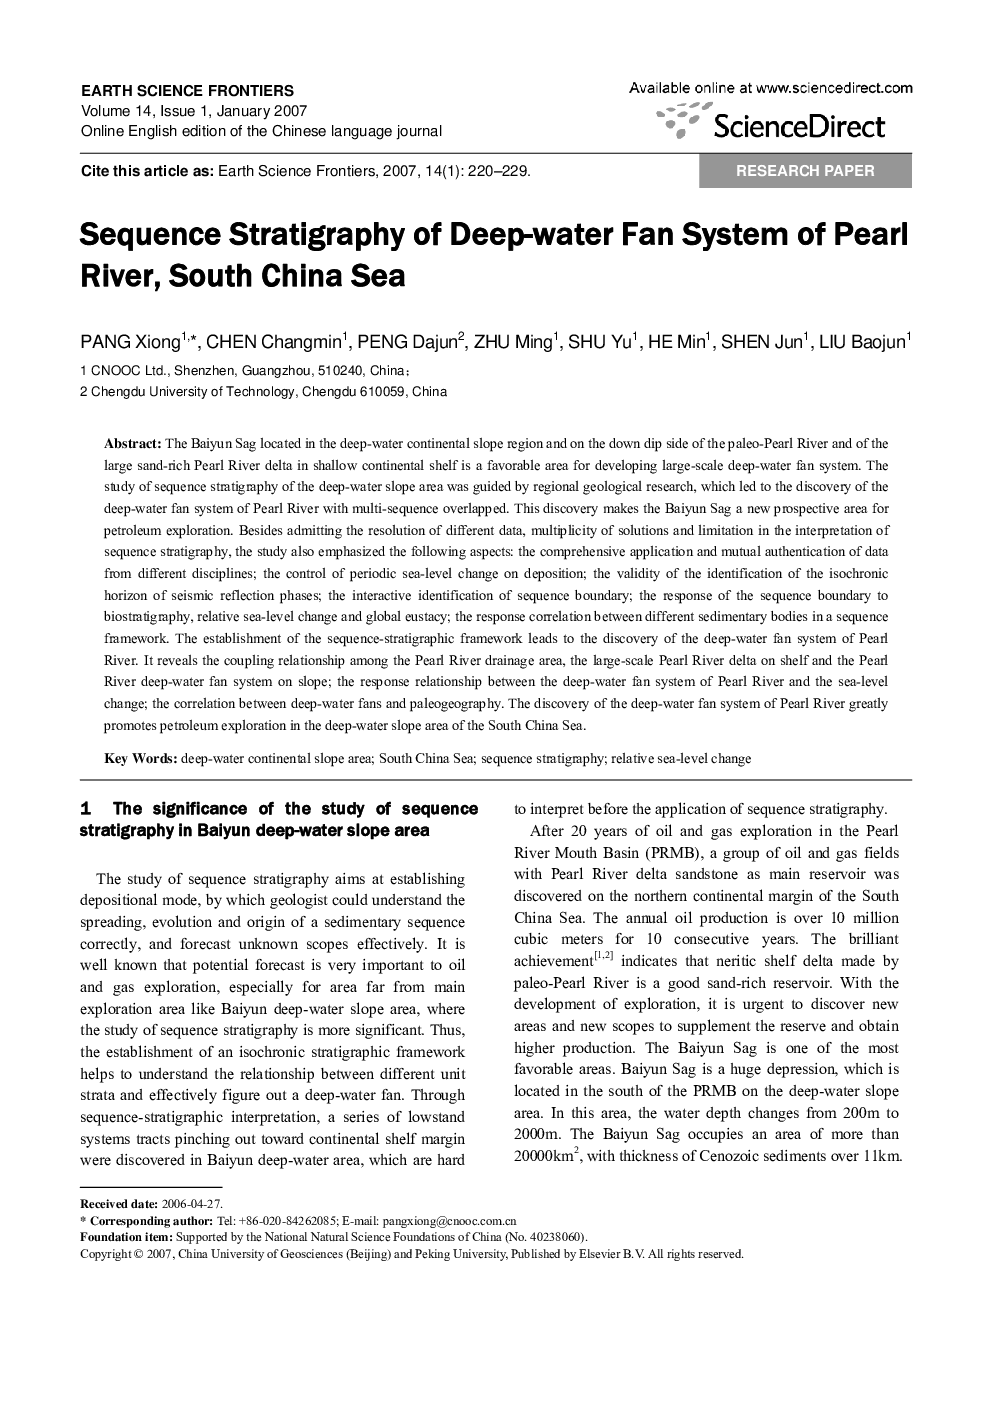 Sequence Stratigraphy of Deep-water Fan System of Pearl River, South China Sea 